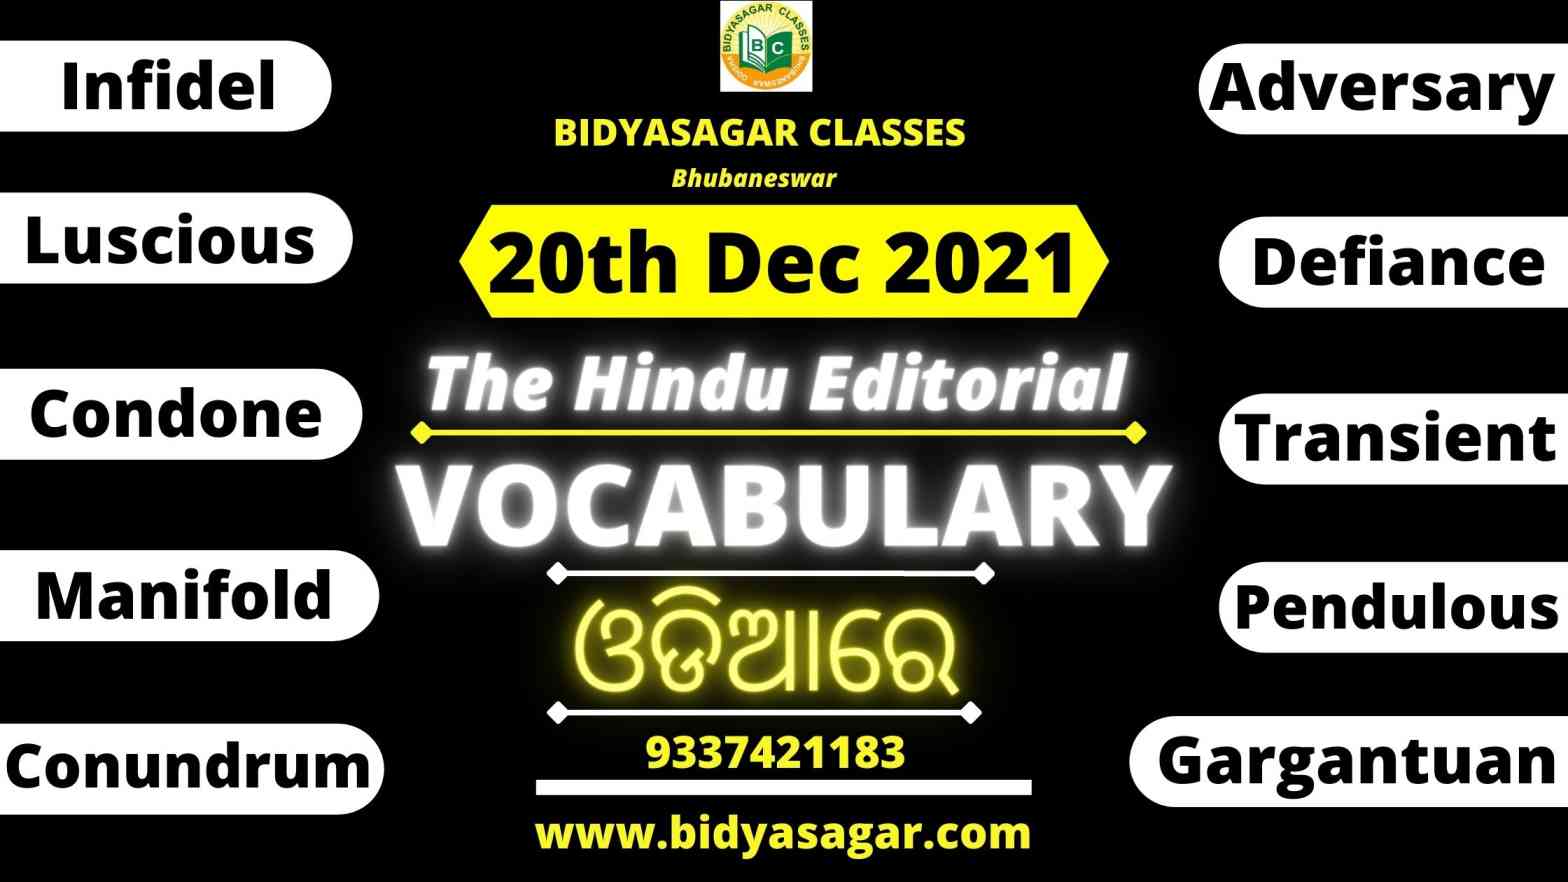 The Hindu Editorial Vocabulary of 20th December 2021